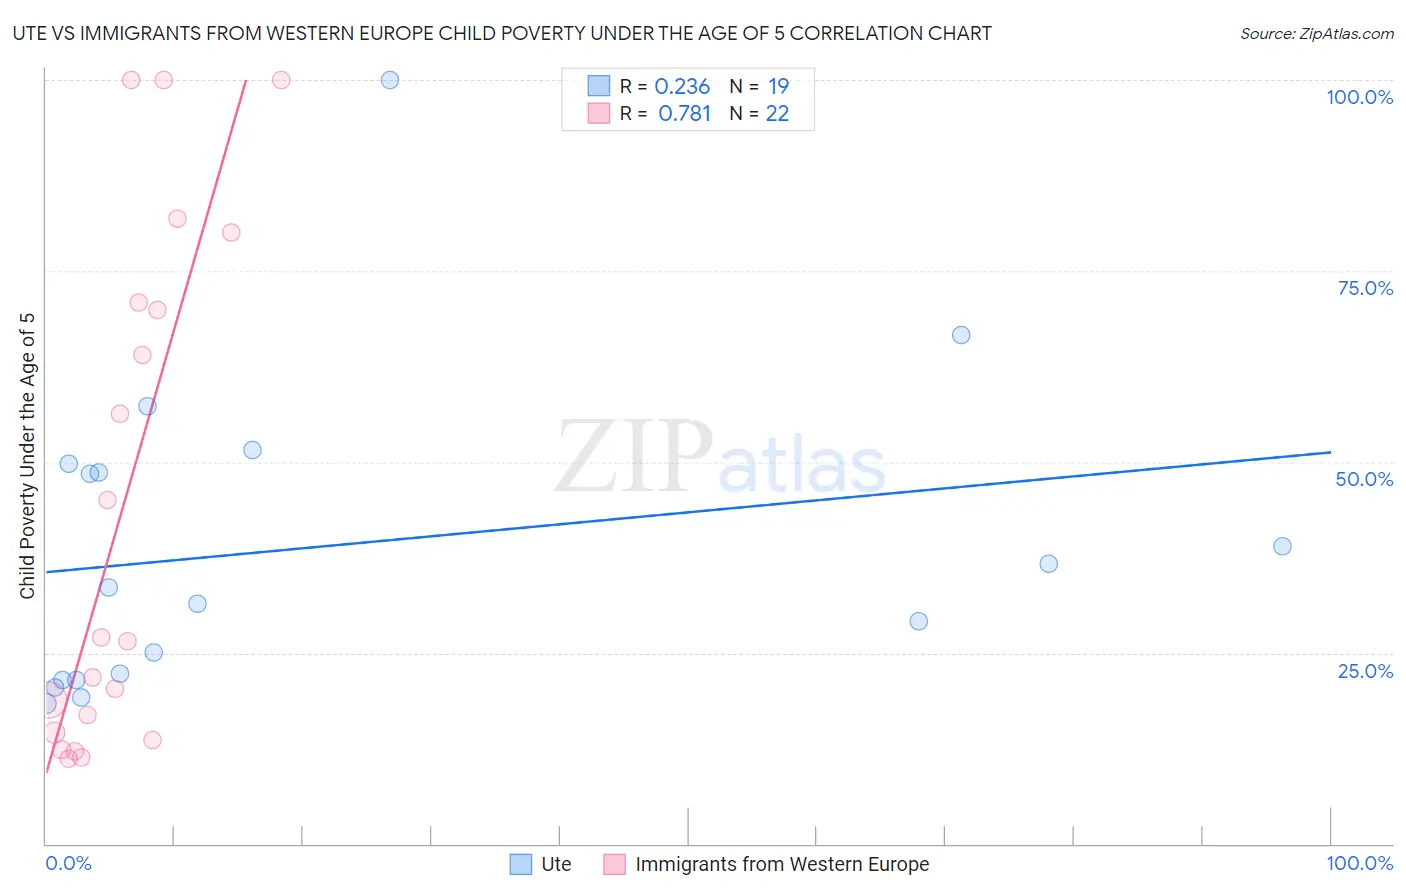 Ute vs Immigrants from Western Europe Child Poverty Under the Age of 5